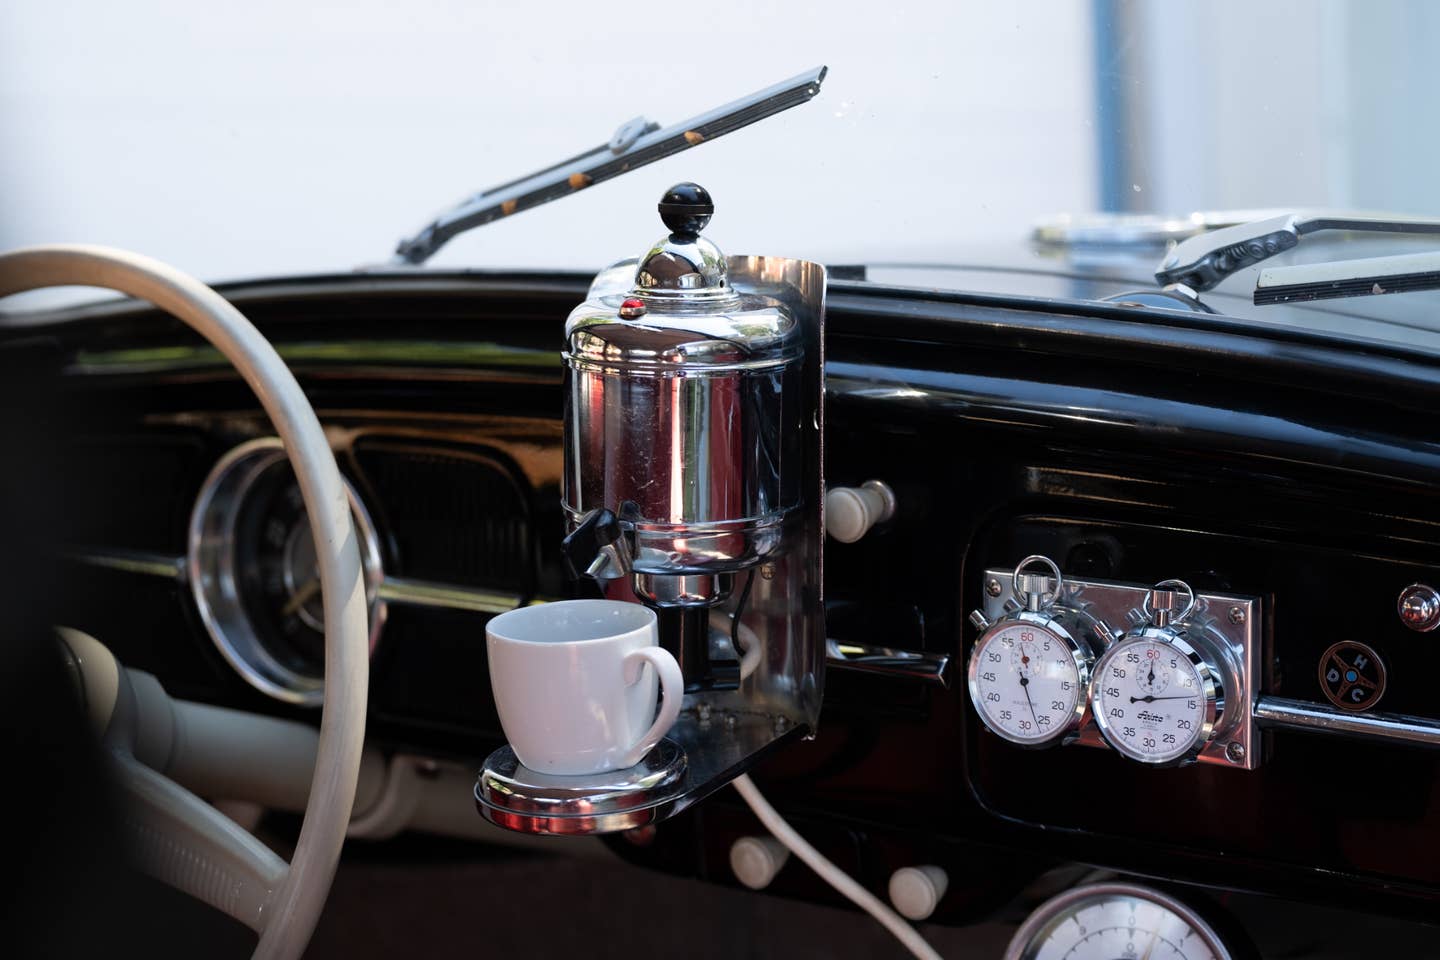 This Dash-Mounted Coffee Maker Is Likely the Rarest Volkswagen